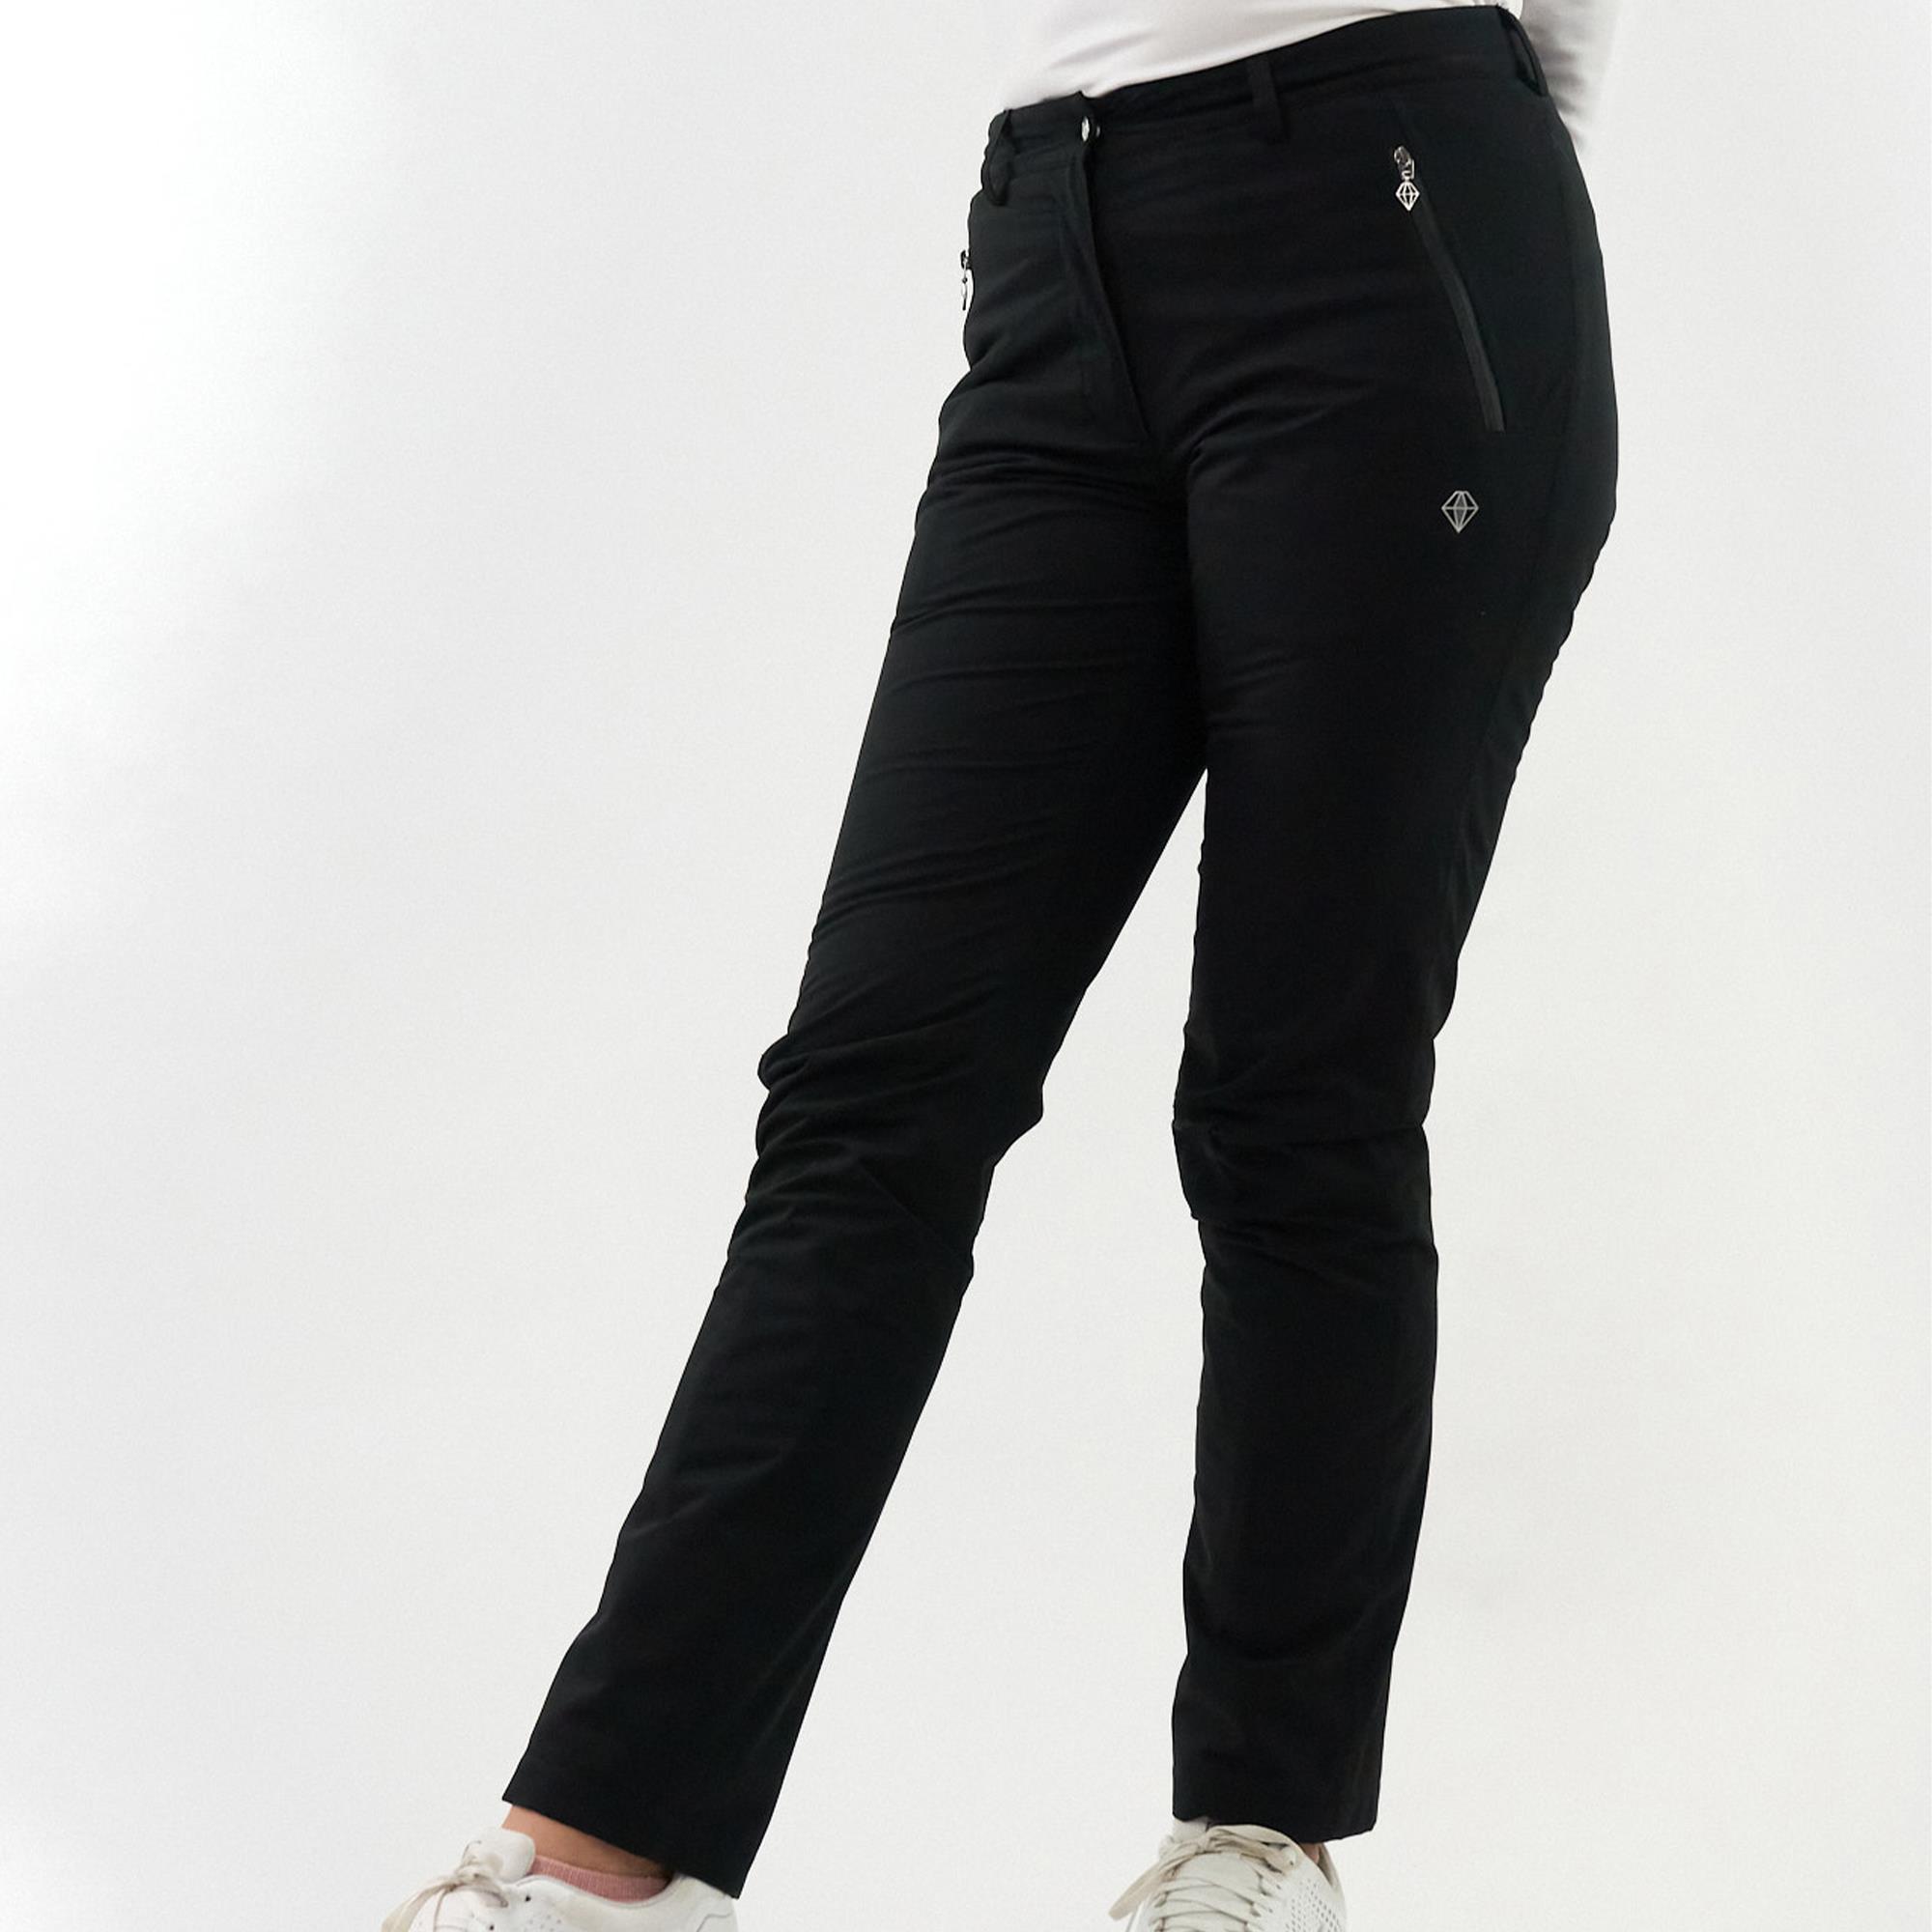 Pure Golf Black Cascade Waterproof/Lined Ladies Golf Trousers – Surprizeshop